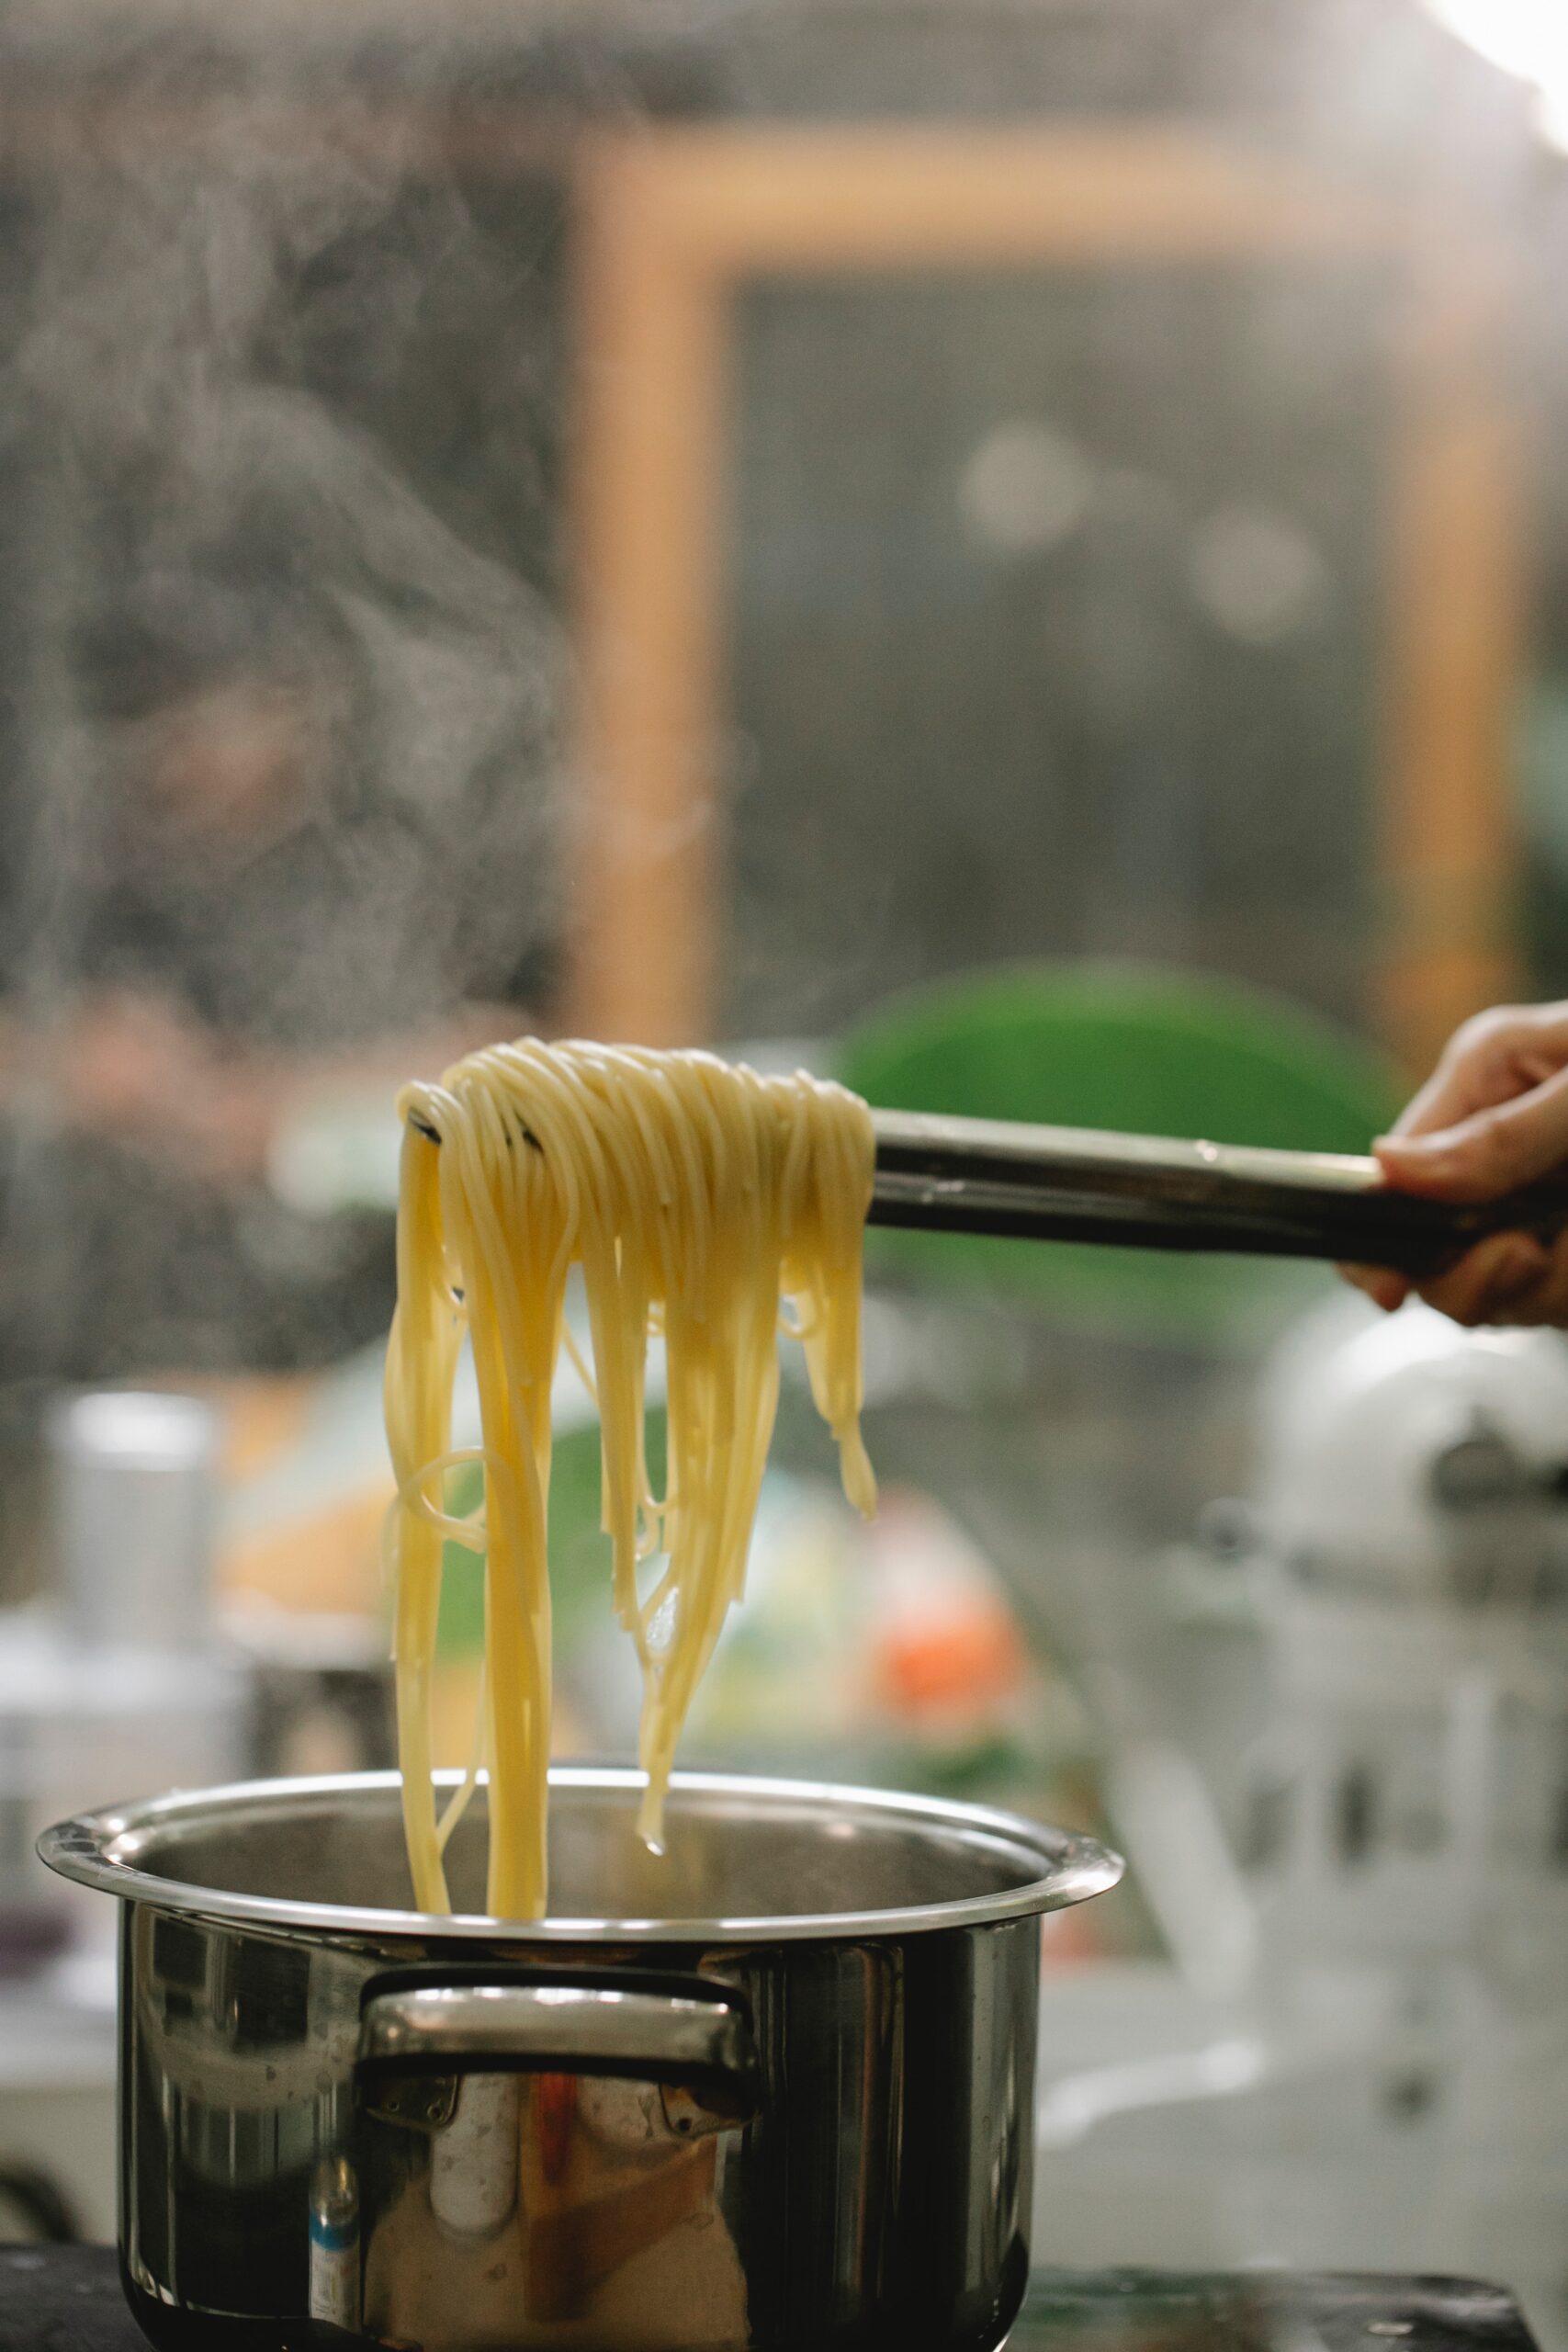 How Long Should You Cook Spaghetti for?